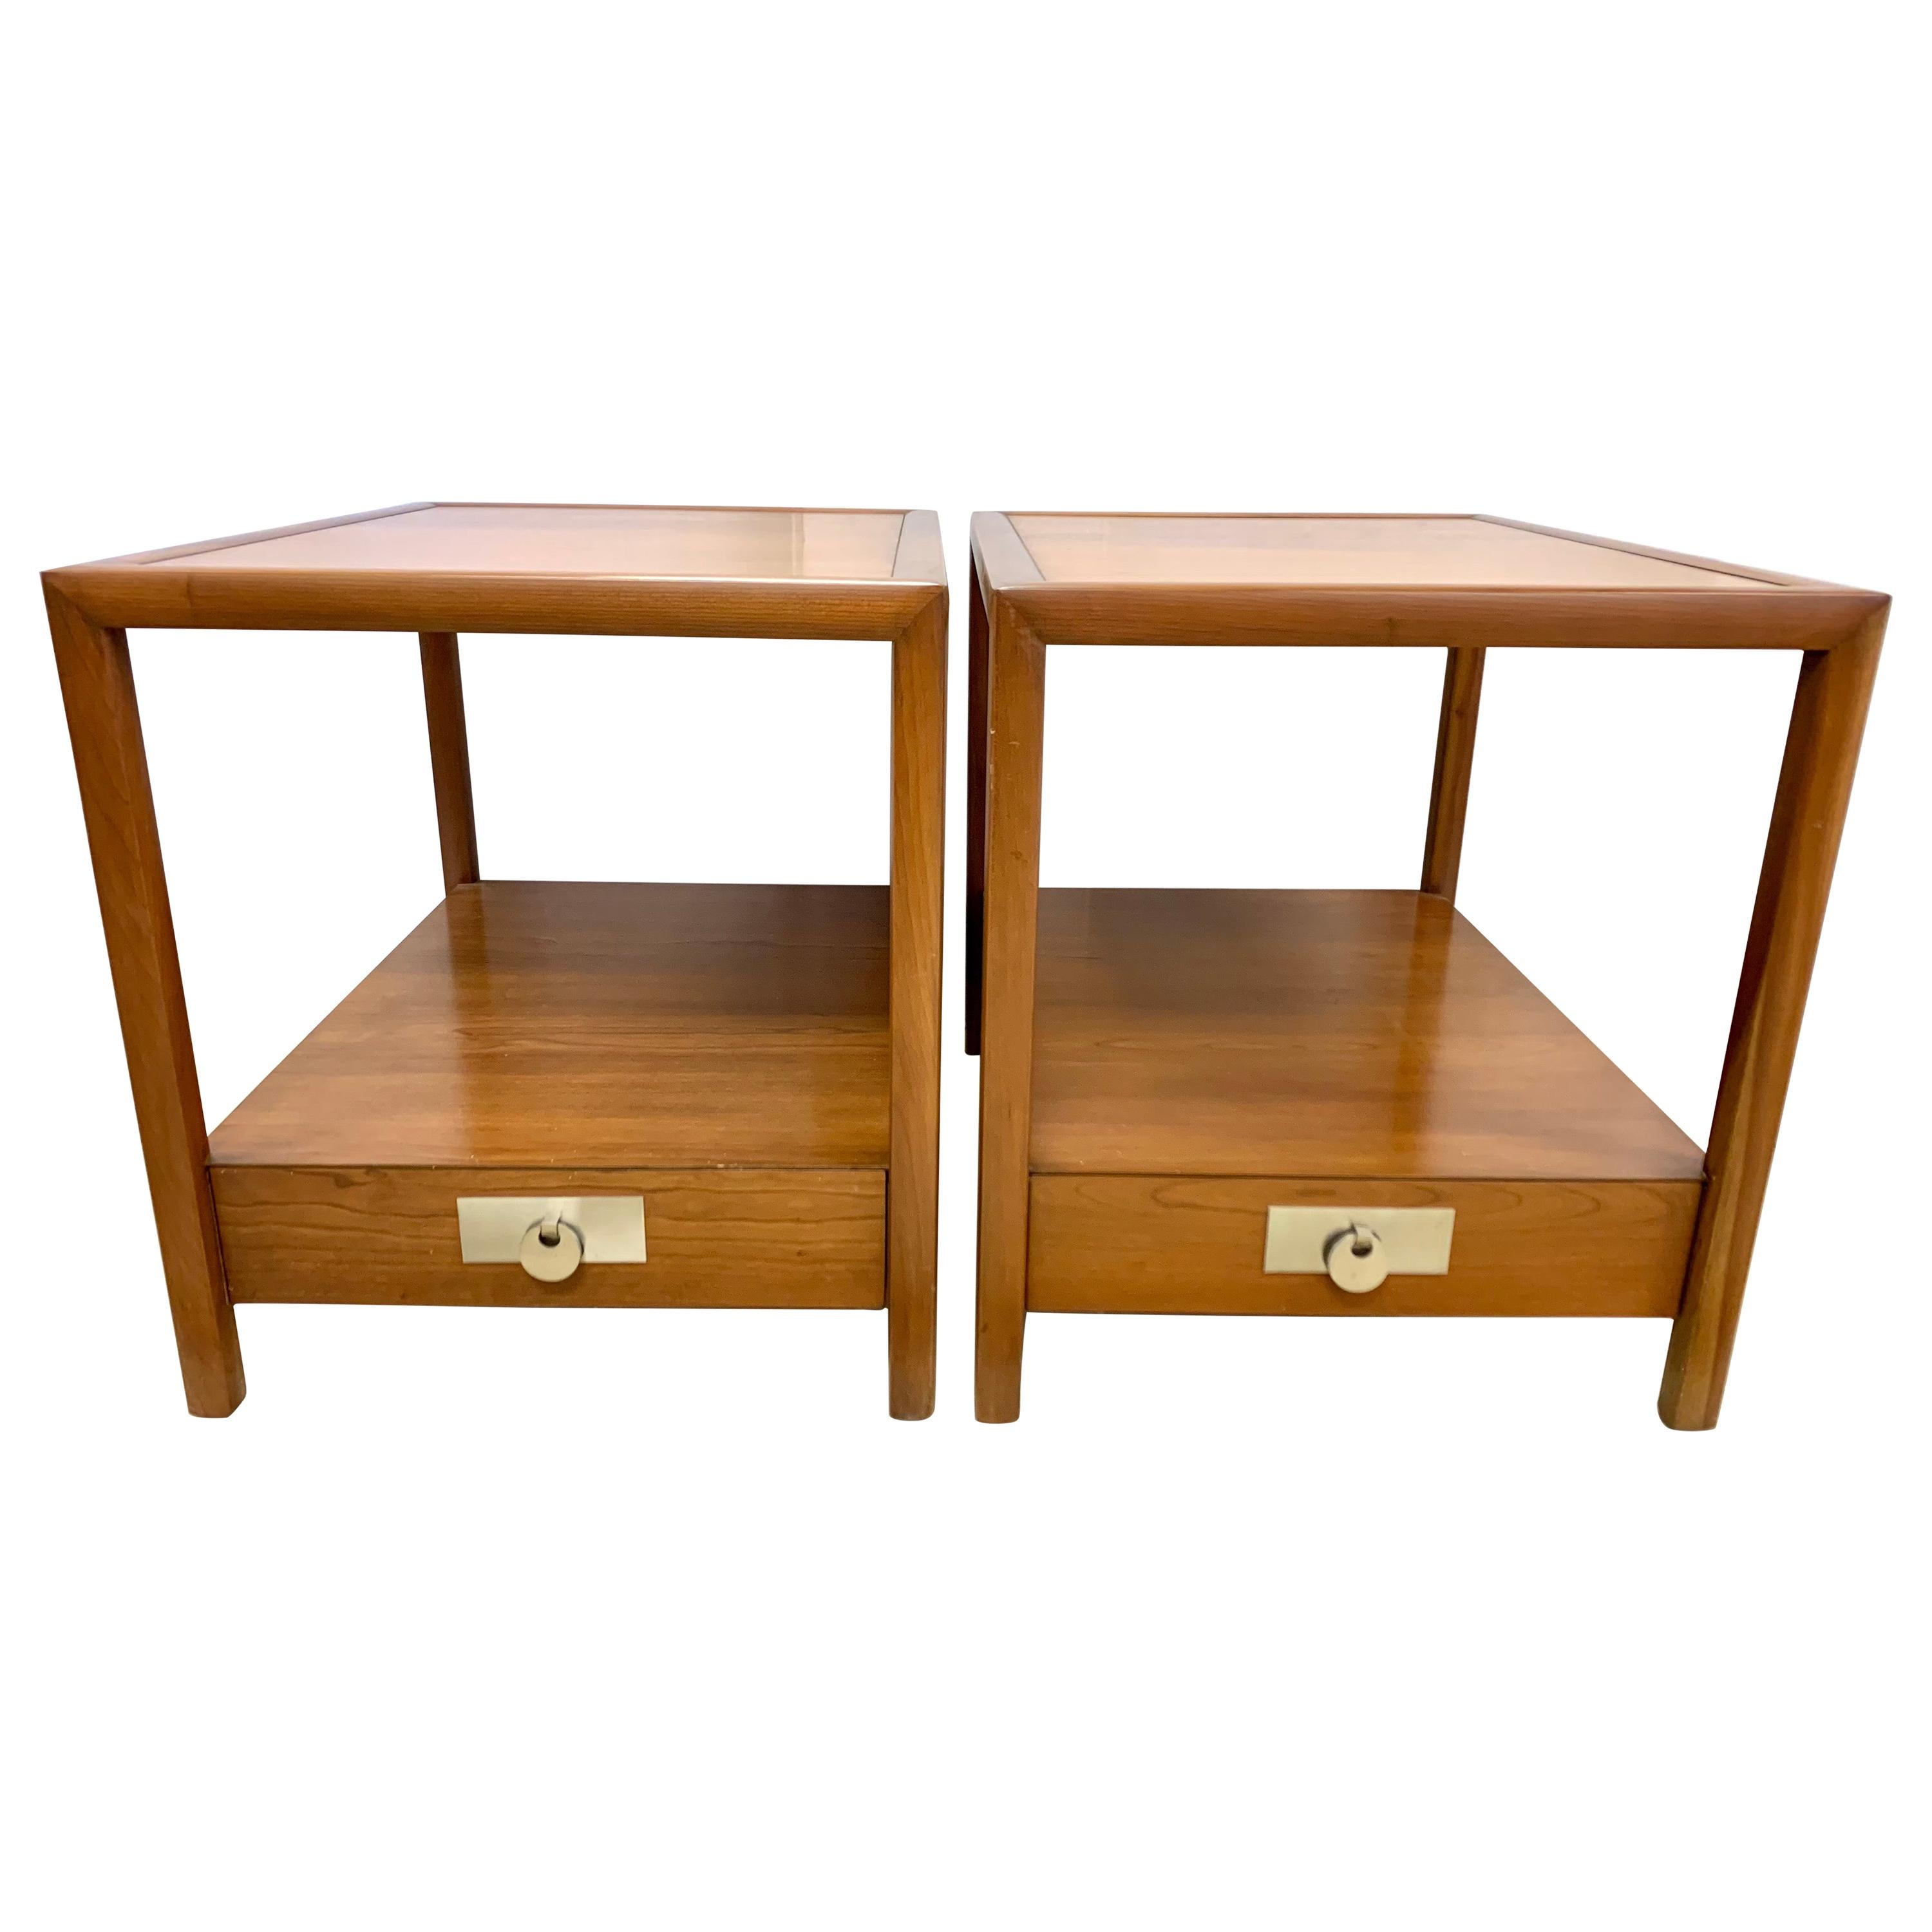 Pair of Rectangular Lamp Tables by Michael Taylor for Baker Furniture New World